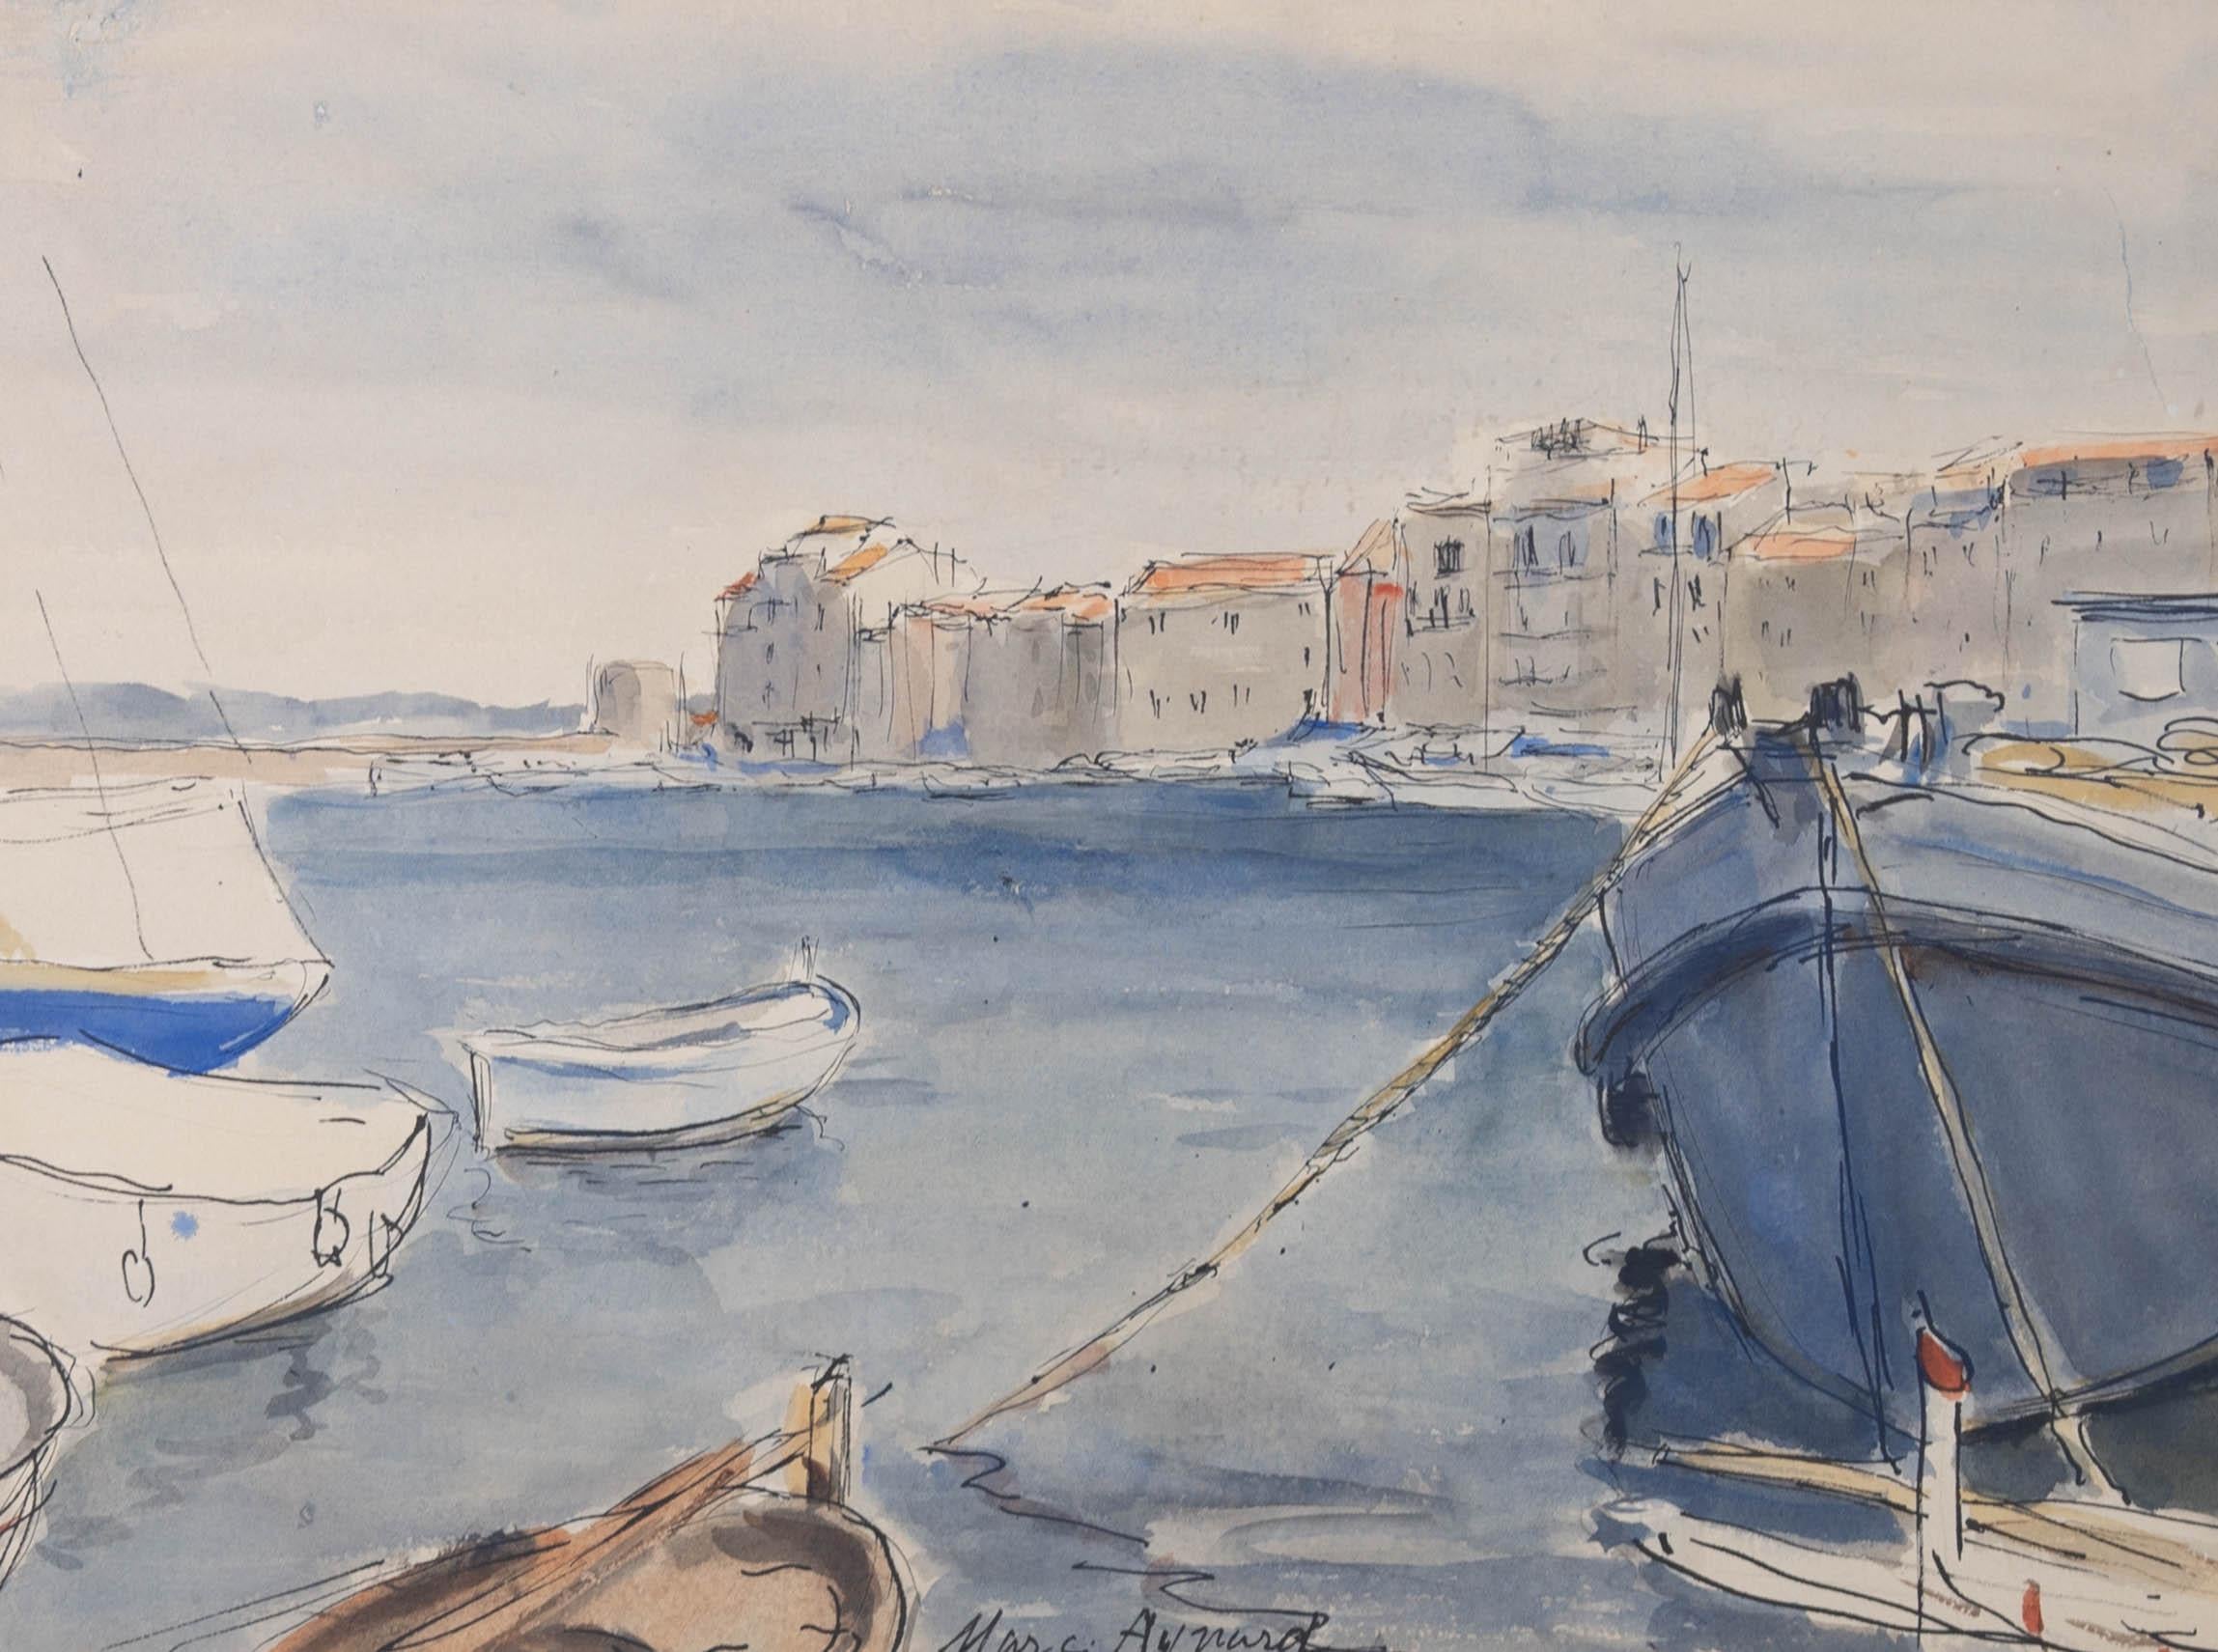 An attractive watercolour painting with pen and ink by the artist Marc Aynard, depicting a French harbour scene with boats. Signed to the lower margin. Presented in a triple card mount and in a distressed, gilt-effect frame. On wove.
